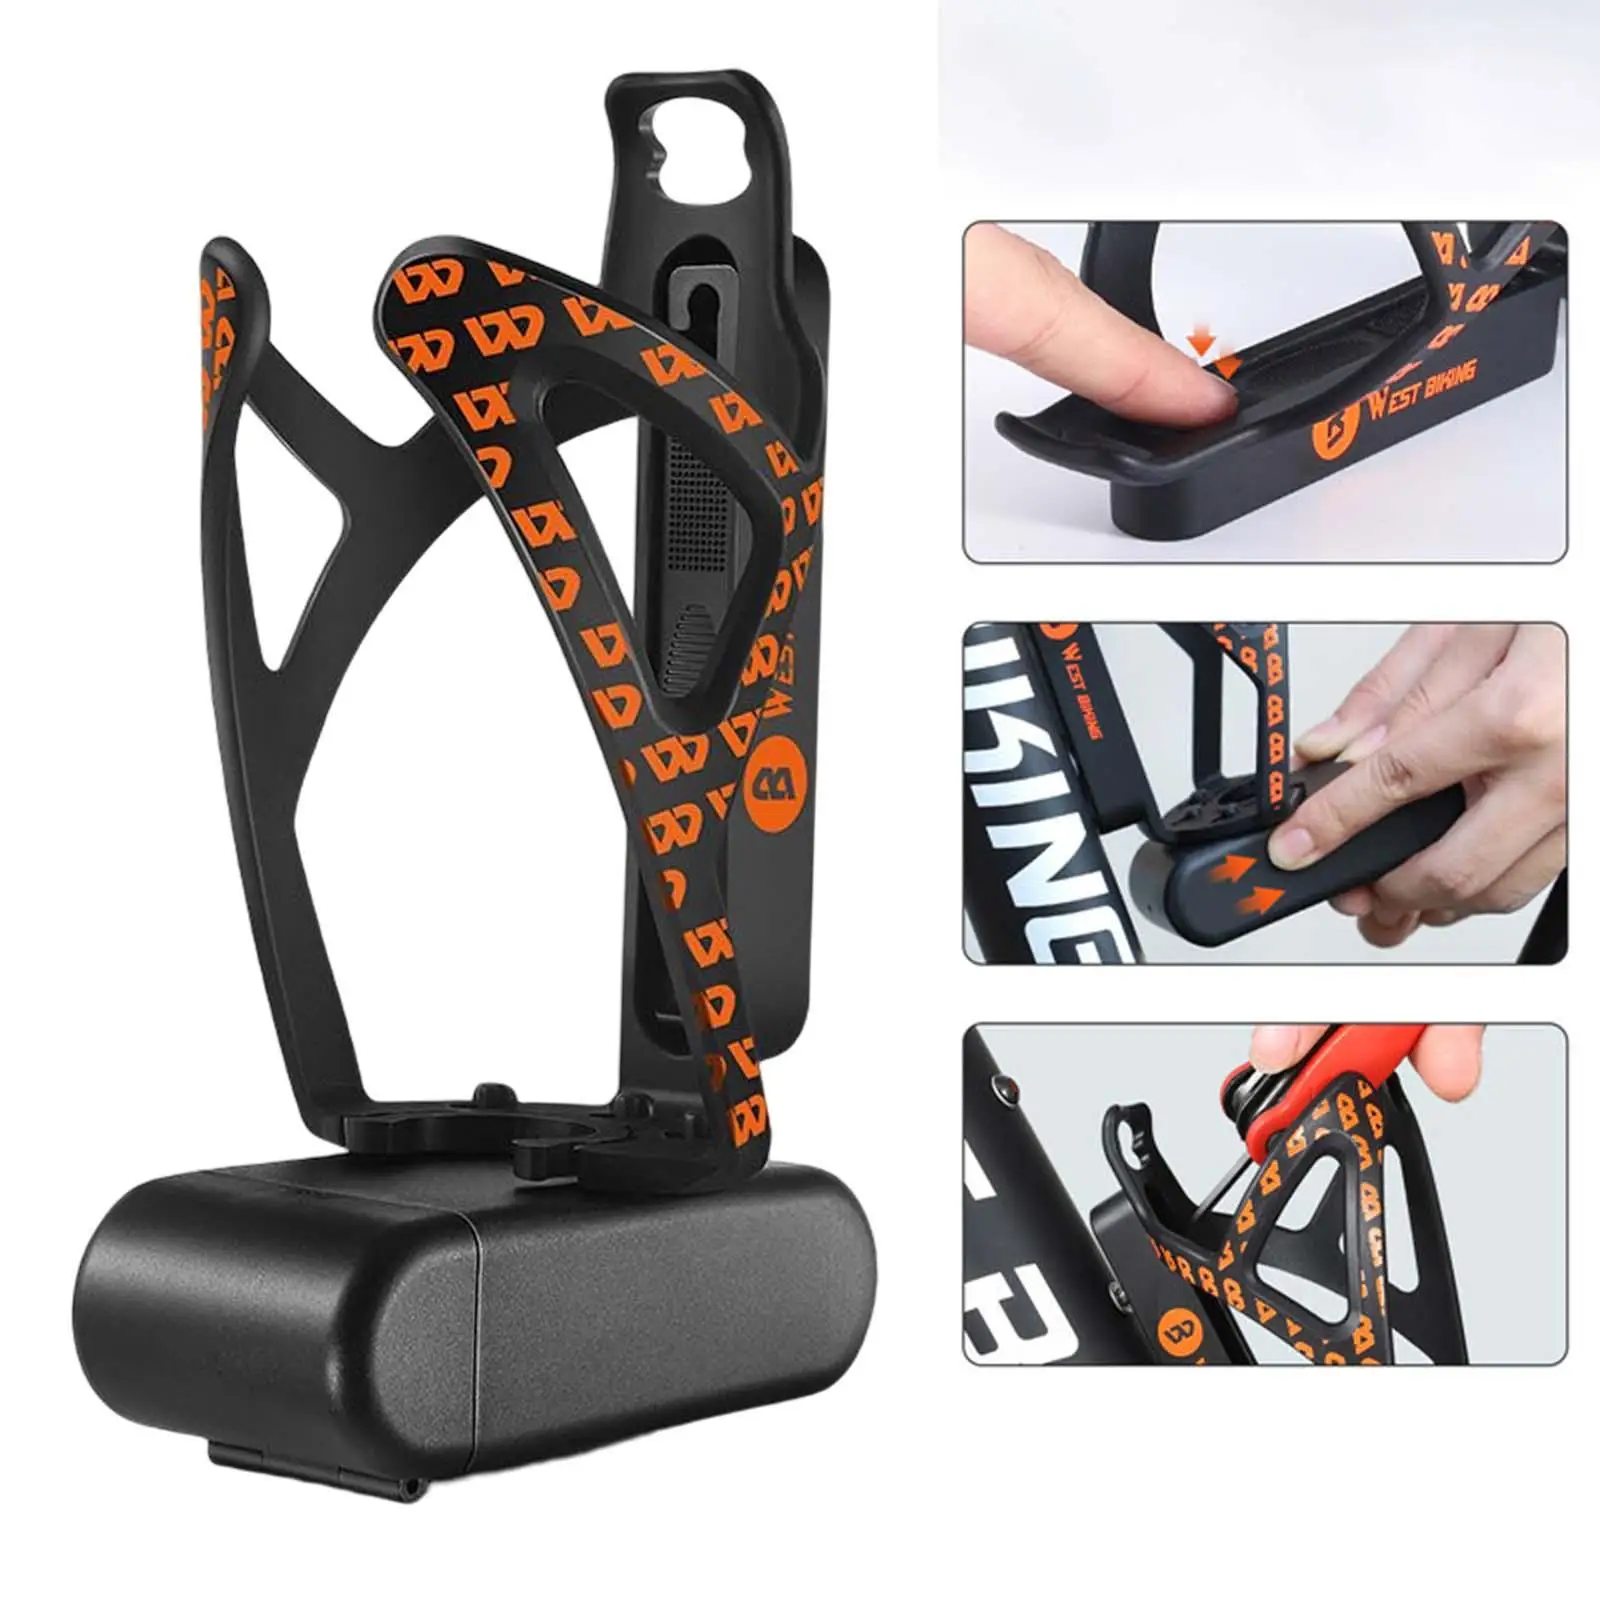 Bicycle Water Bottle Holder Cages W/ Tire Stick for Bike Cycling Equipment Outdoor Bottle Tire Lever Cycling Accessories